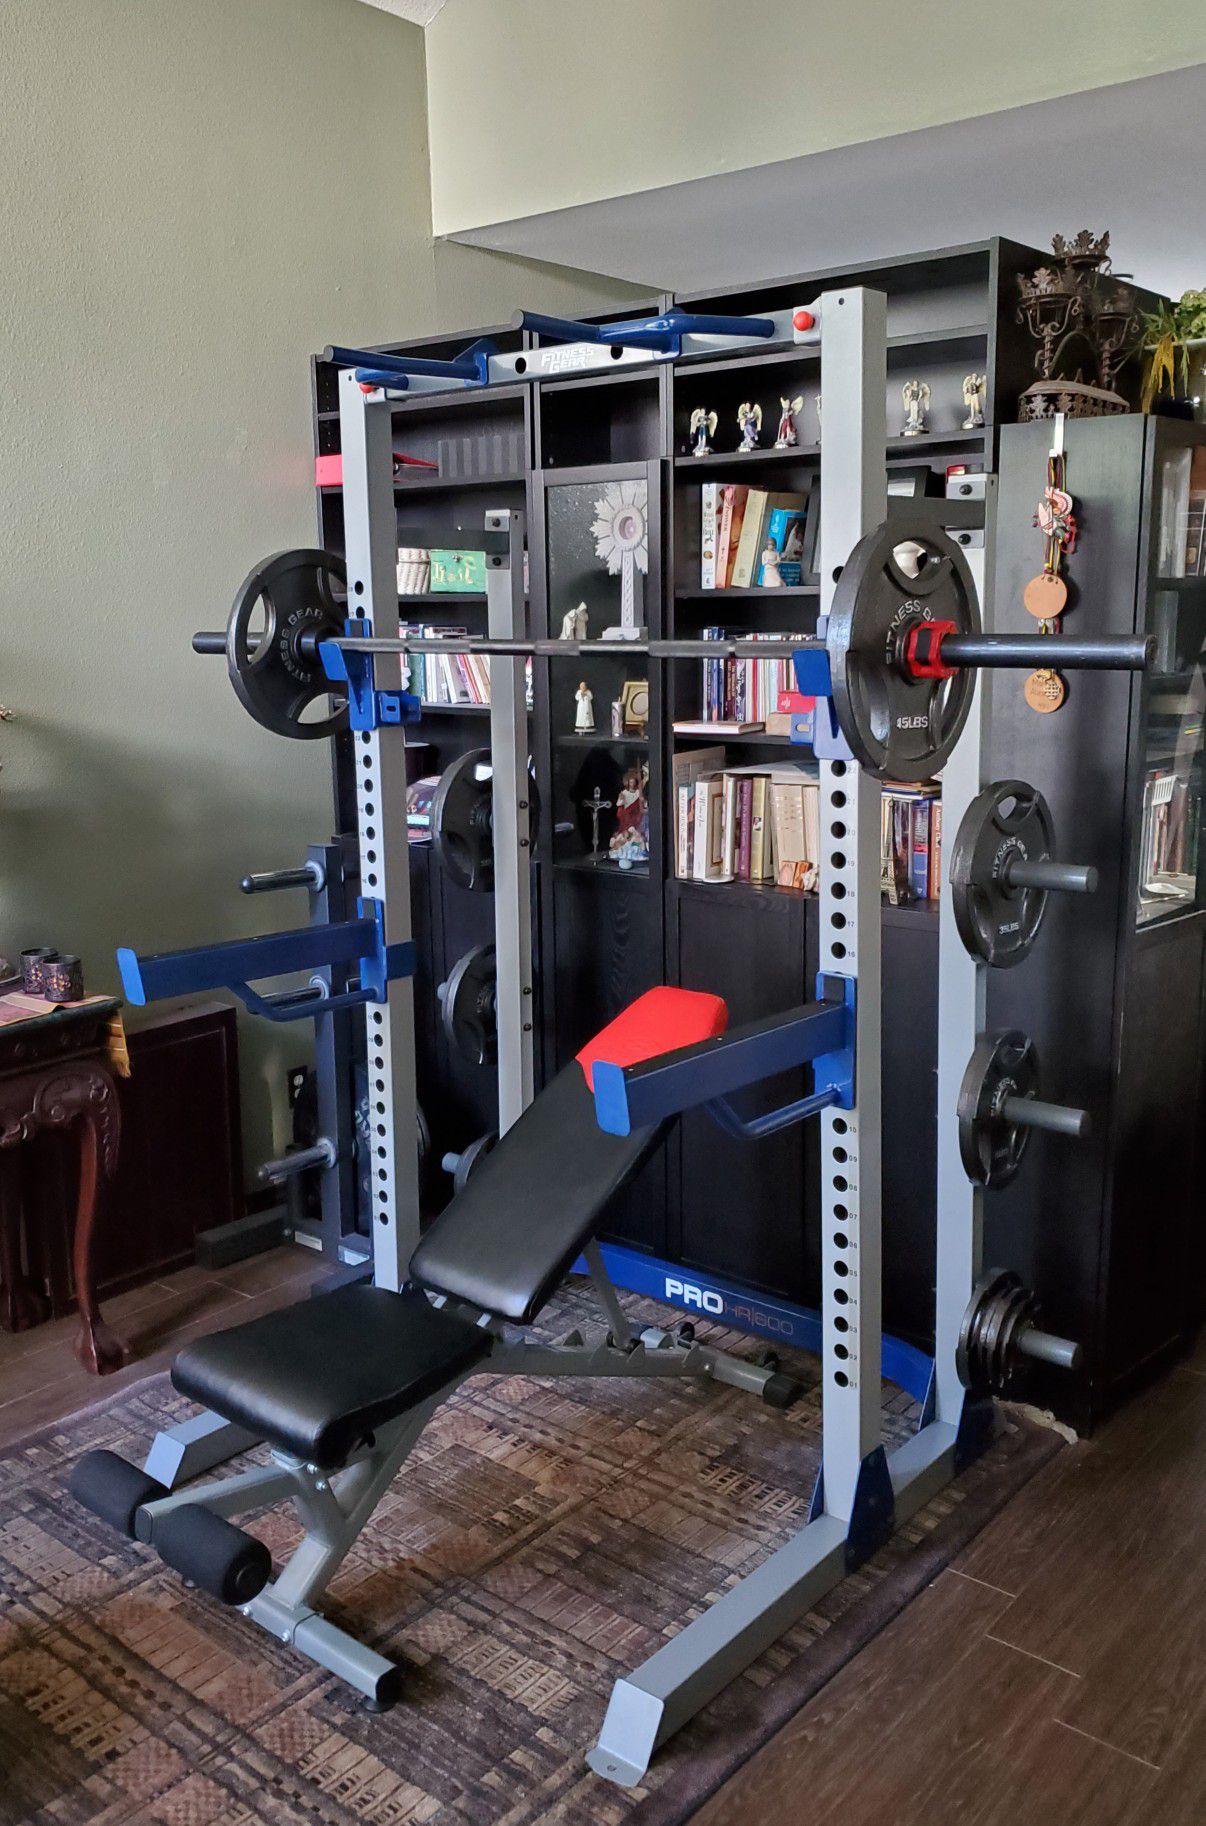 EXERCISE FITNESS EQUIPMENT OLYMPIC WEIGHT GYM SET-UP